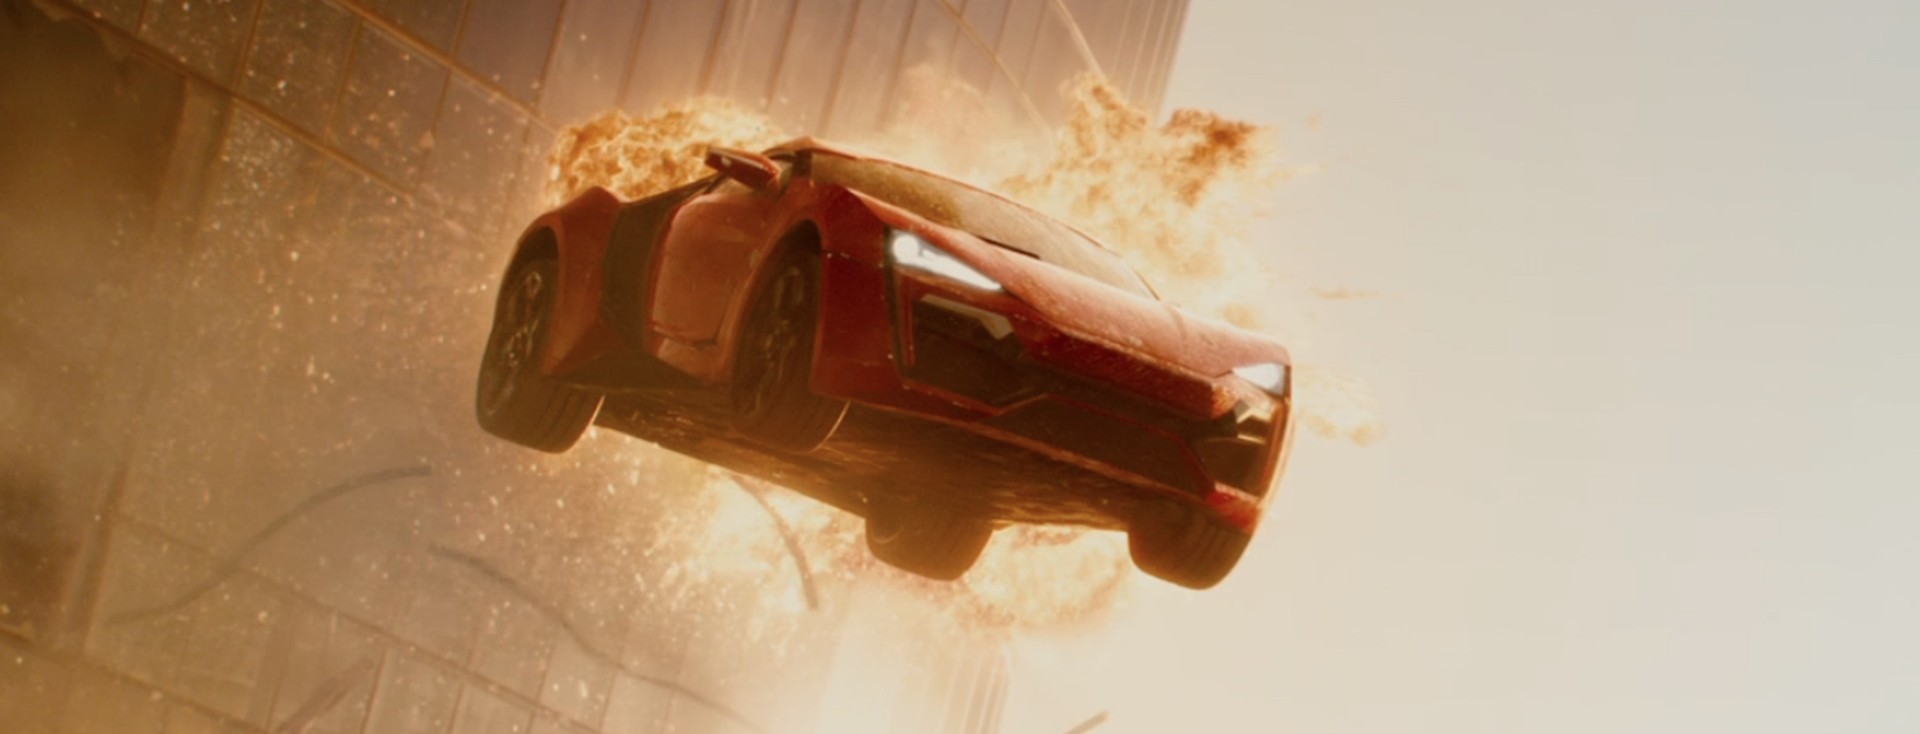 Furious 7 is  the Fastest and Most Furious Installment, According to Science